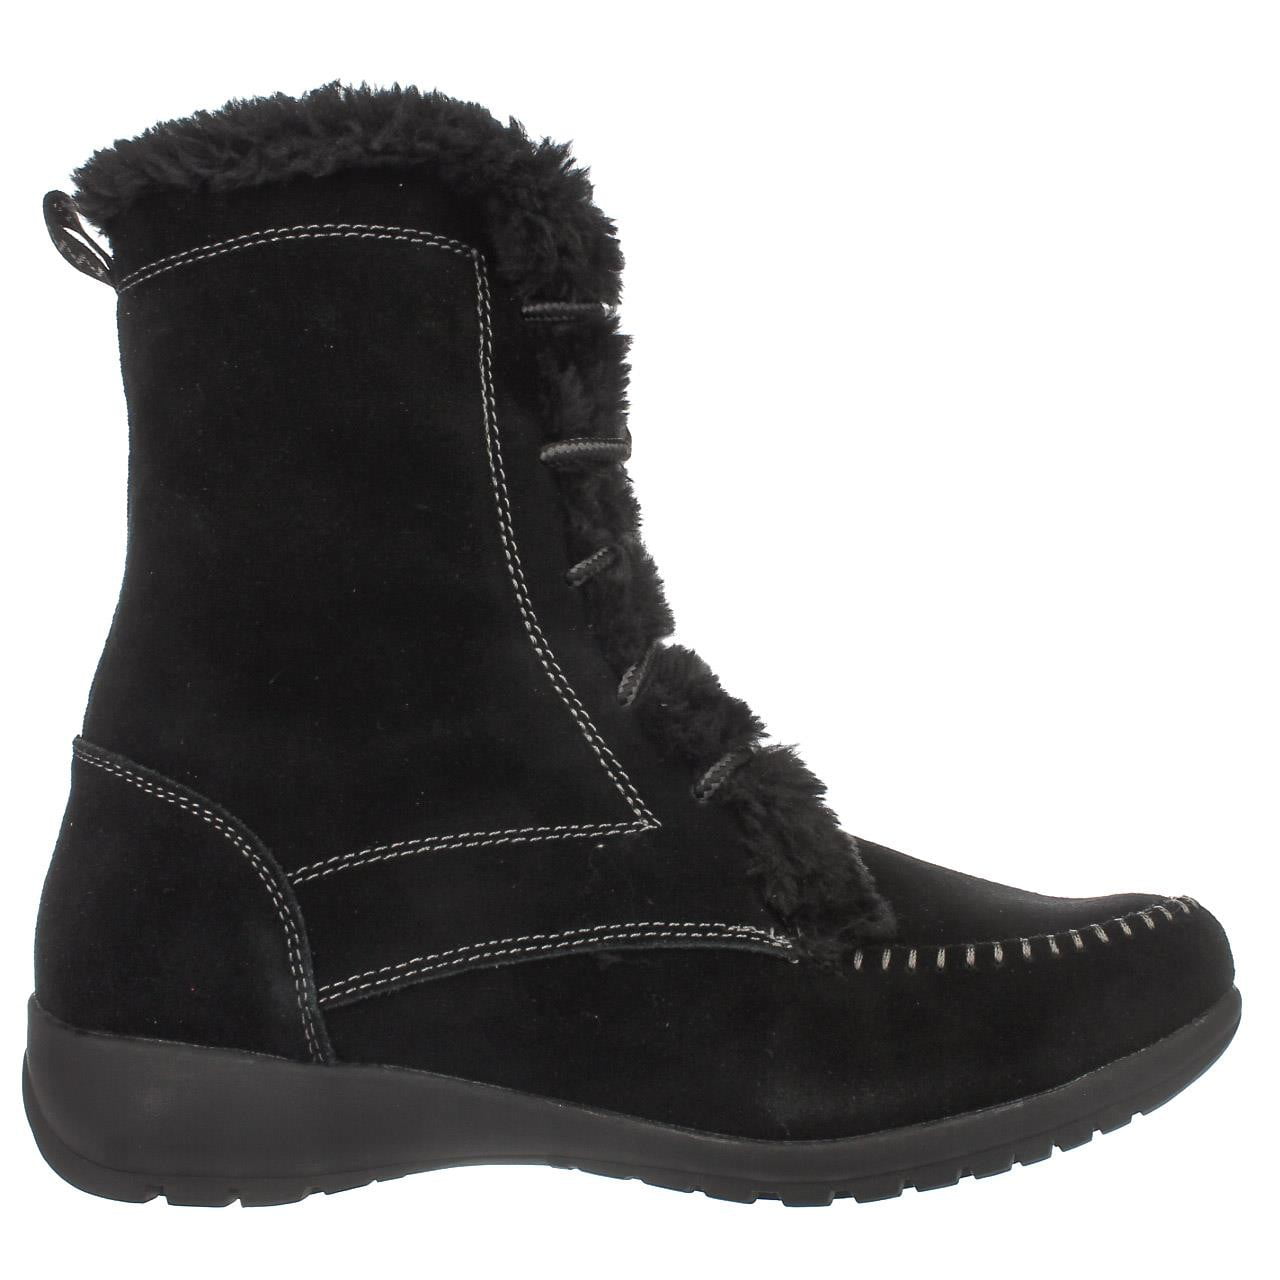 Sporto Womens Maggie Closed Toe Ankle Cold Weather Boots - Walmart.com